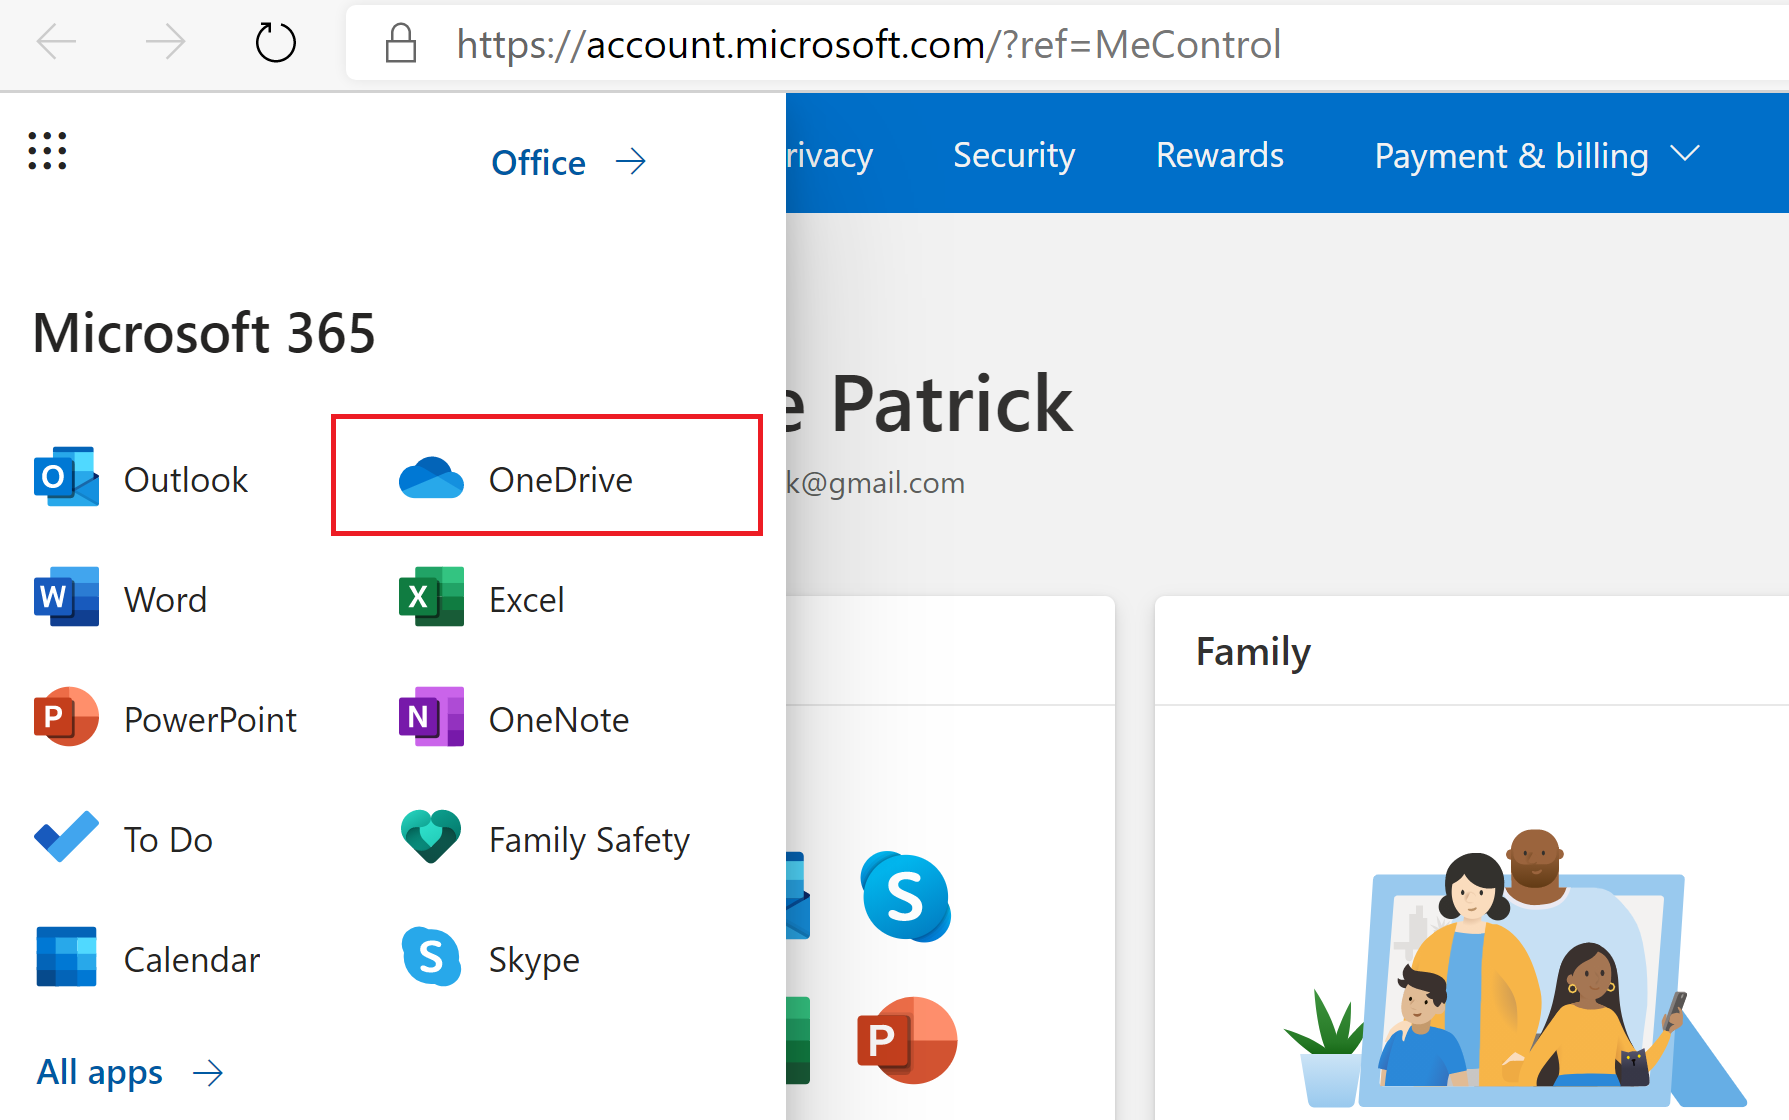 How can I access OneDrive from deleted gmail account? - Microsoft Q&A